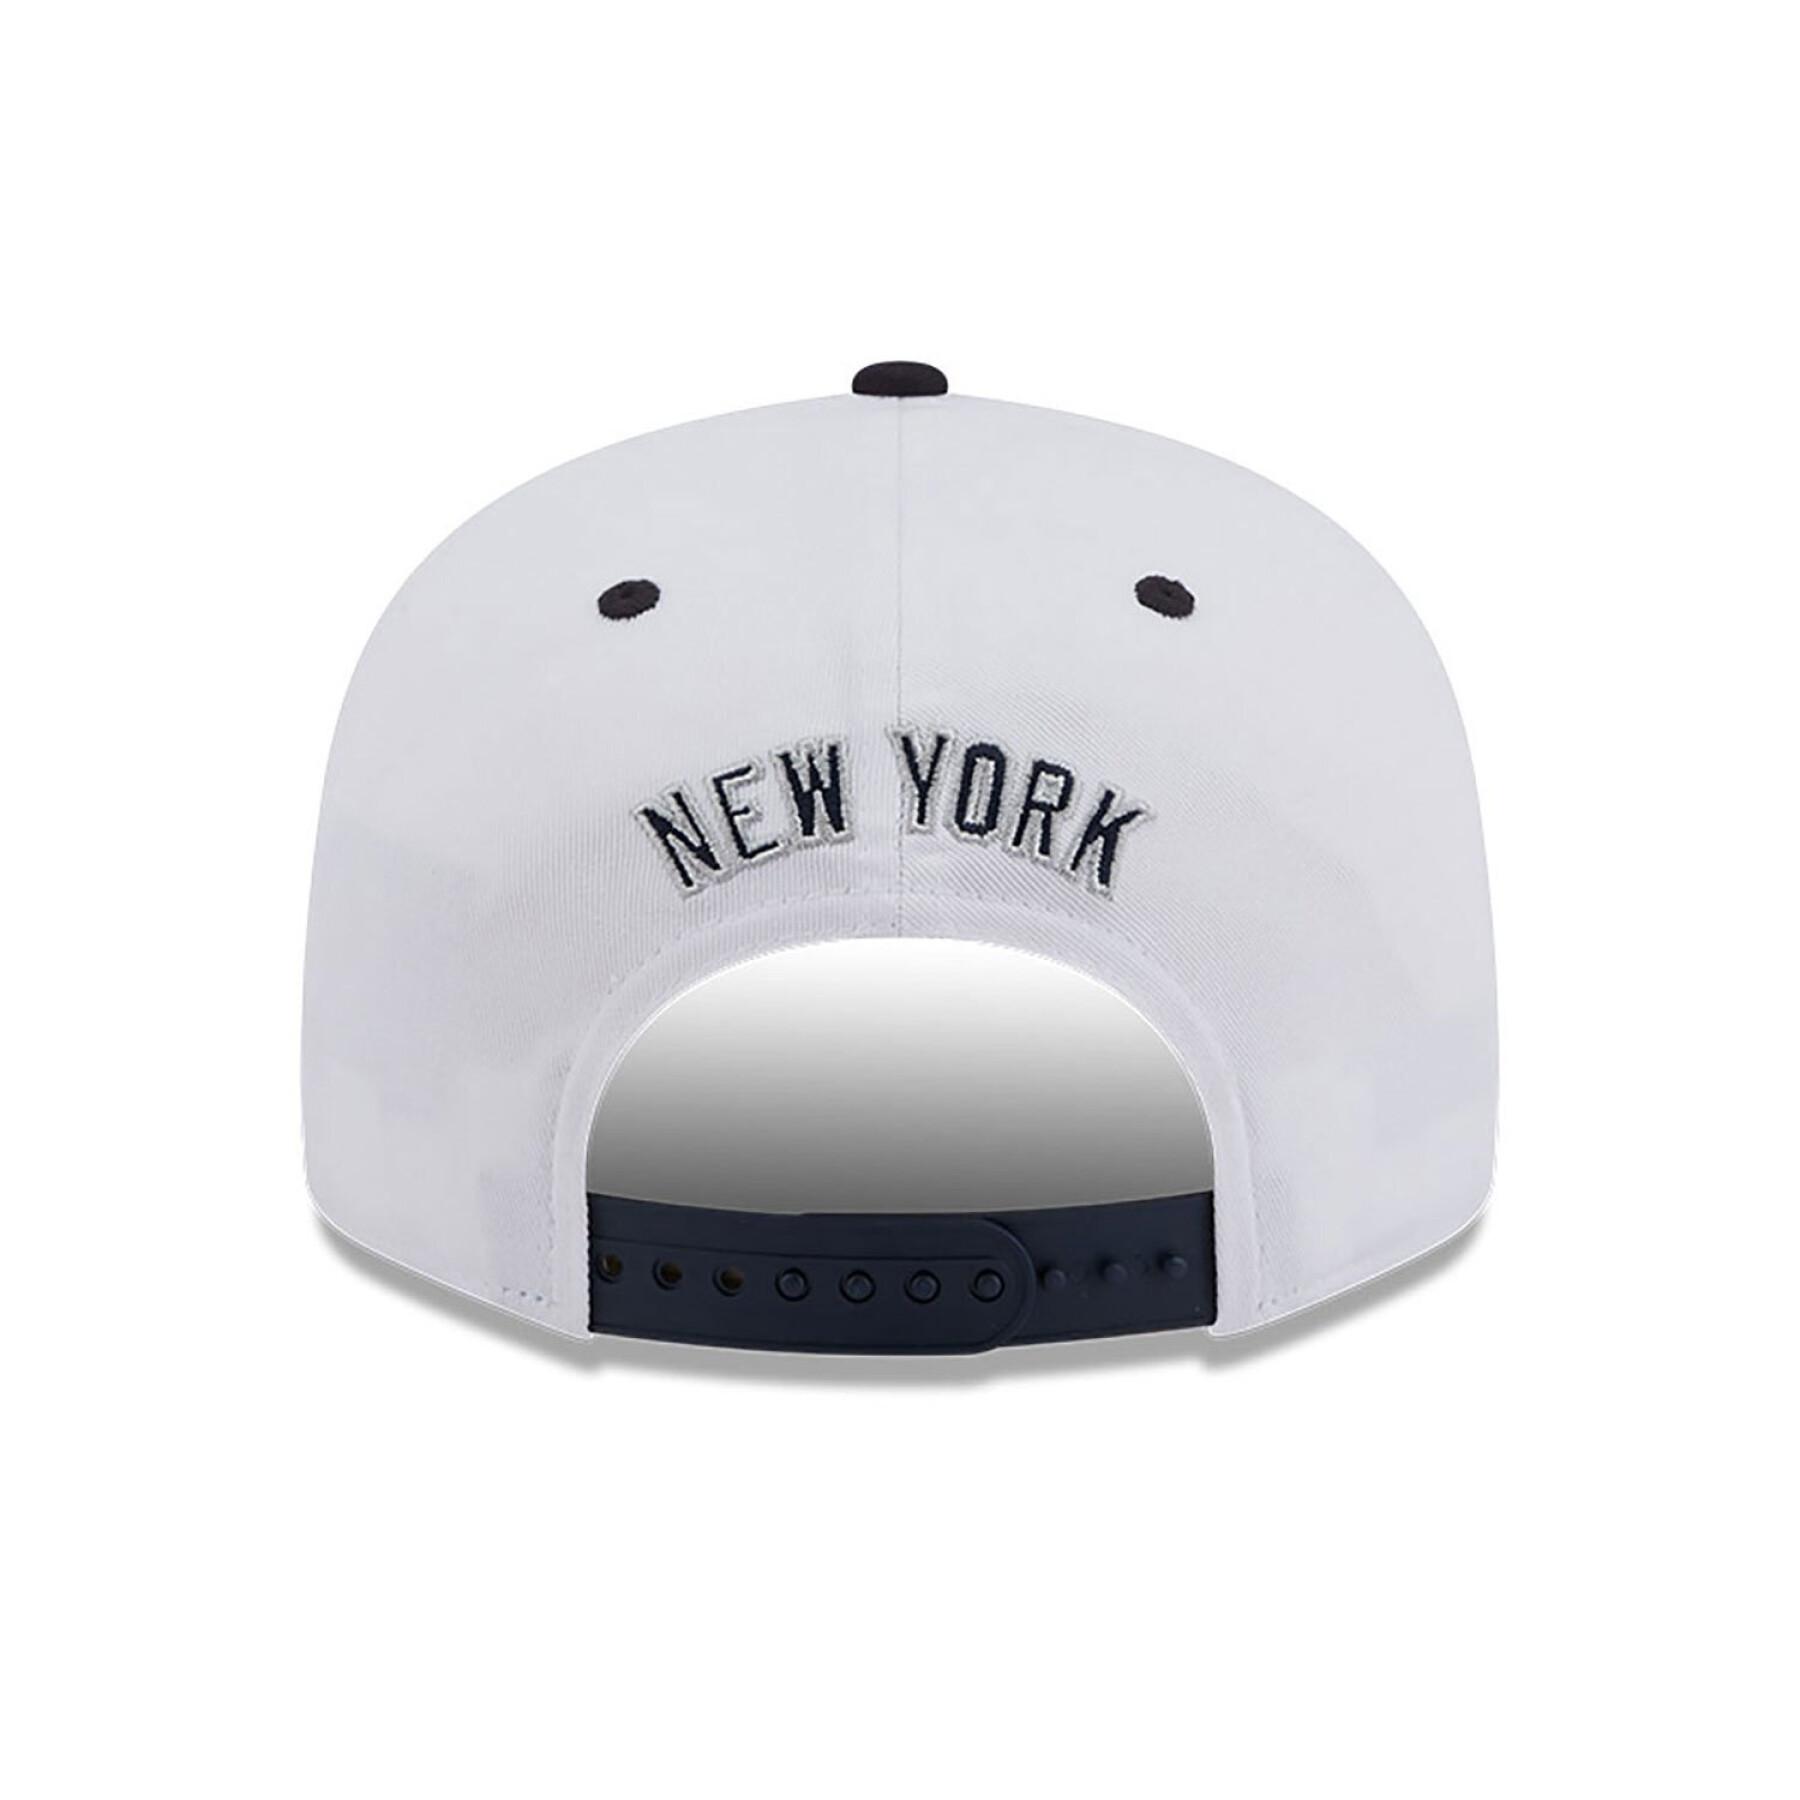 Gorra 9fifty New York Yankees Crown Patch